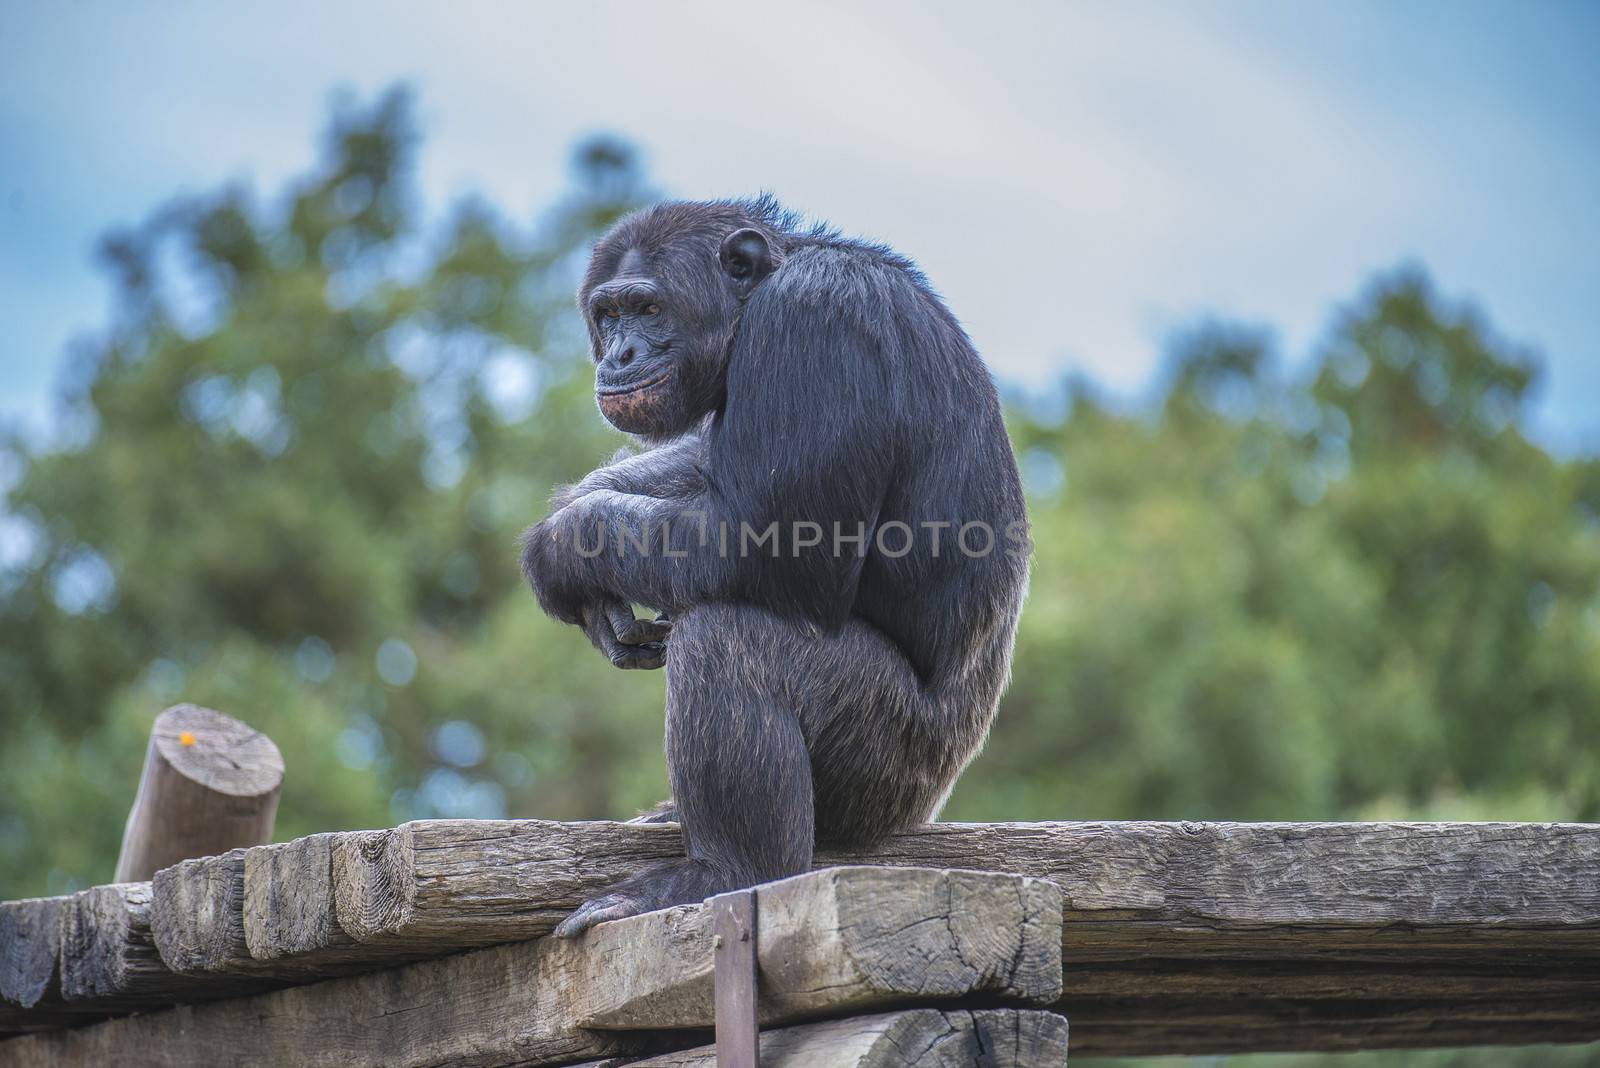 Chimpanzee, primatart in the human ape family. Is the species which, together with the dwarf chimpanzee (also called the bonobo), shows the greatest similarity with humans. Photo is shot 27/07/2013.